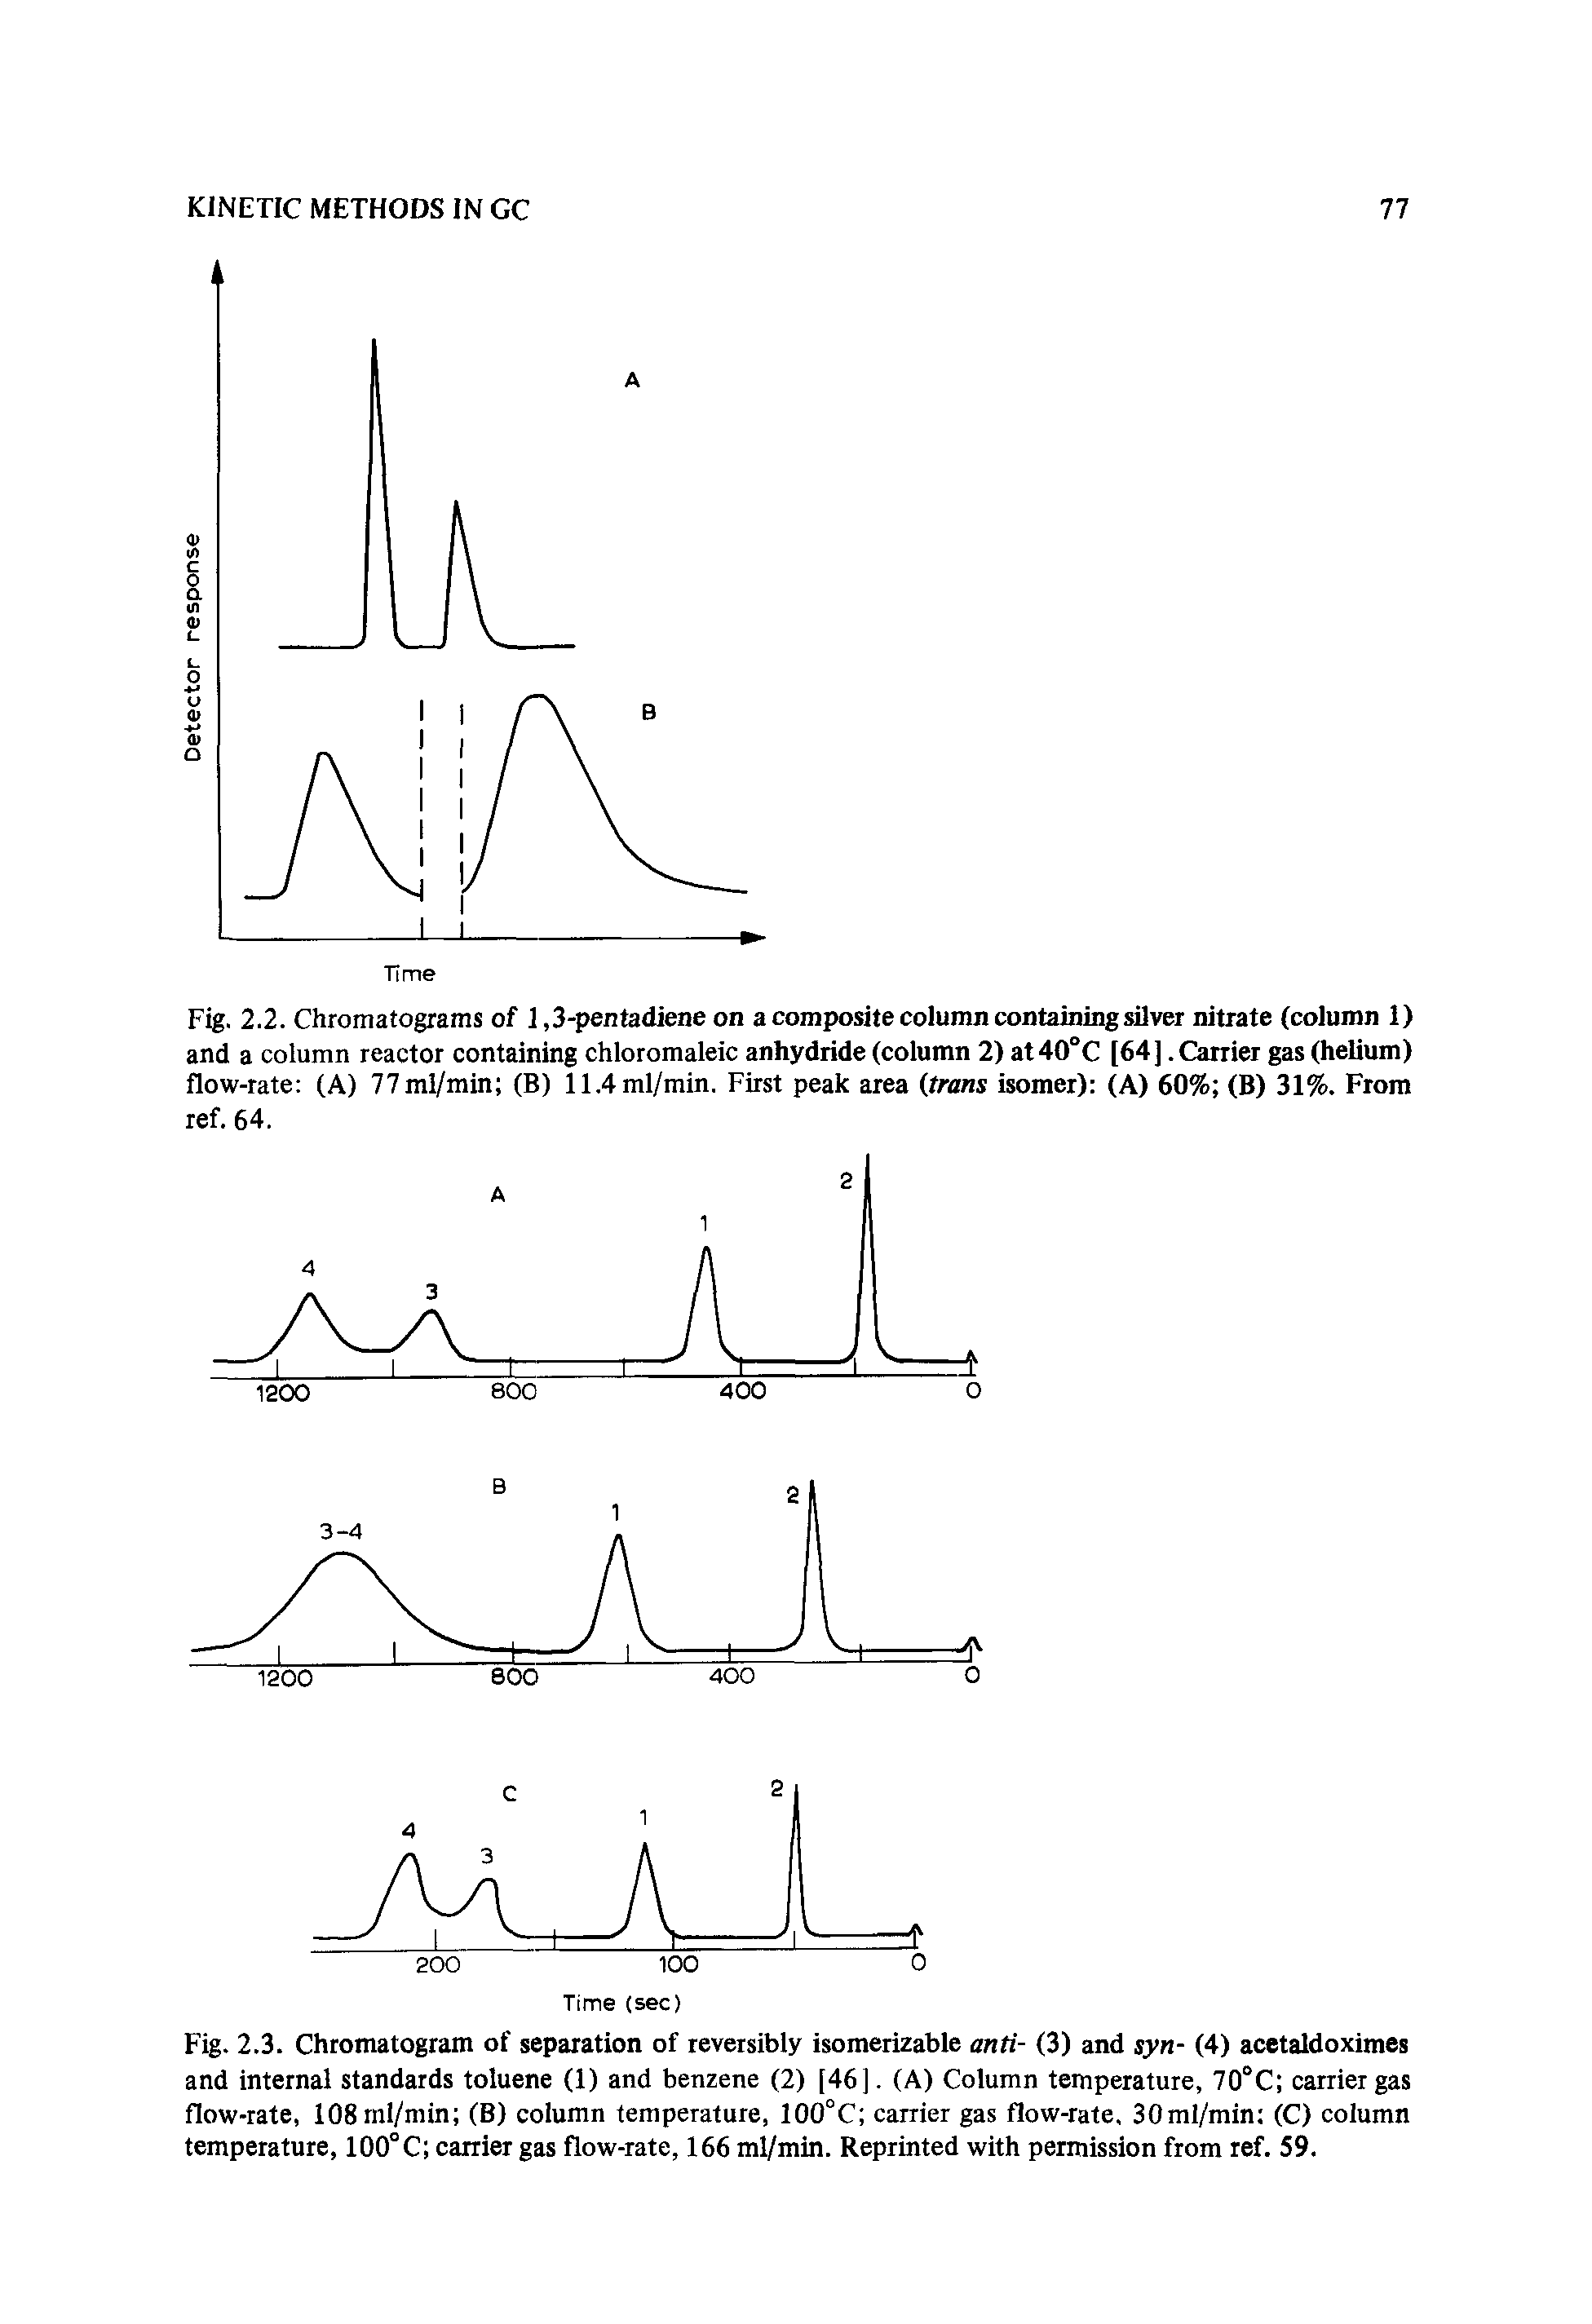 Fig. 2.2. Chromatograms of 1,3-pentadiene on a composite column containing silver nitrate (column 1) and a column reactor containing chloromaleic anhydride (column 2) at40°C [64]. Carrier gas (helium) flow-rate (A) 77ml/min (B) 11.4ml/min. First peak area (trans isomer) (A) 60% (B) 31%. From ref. 64.